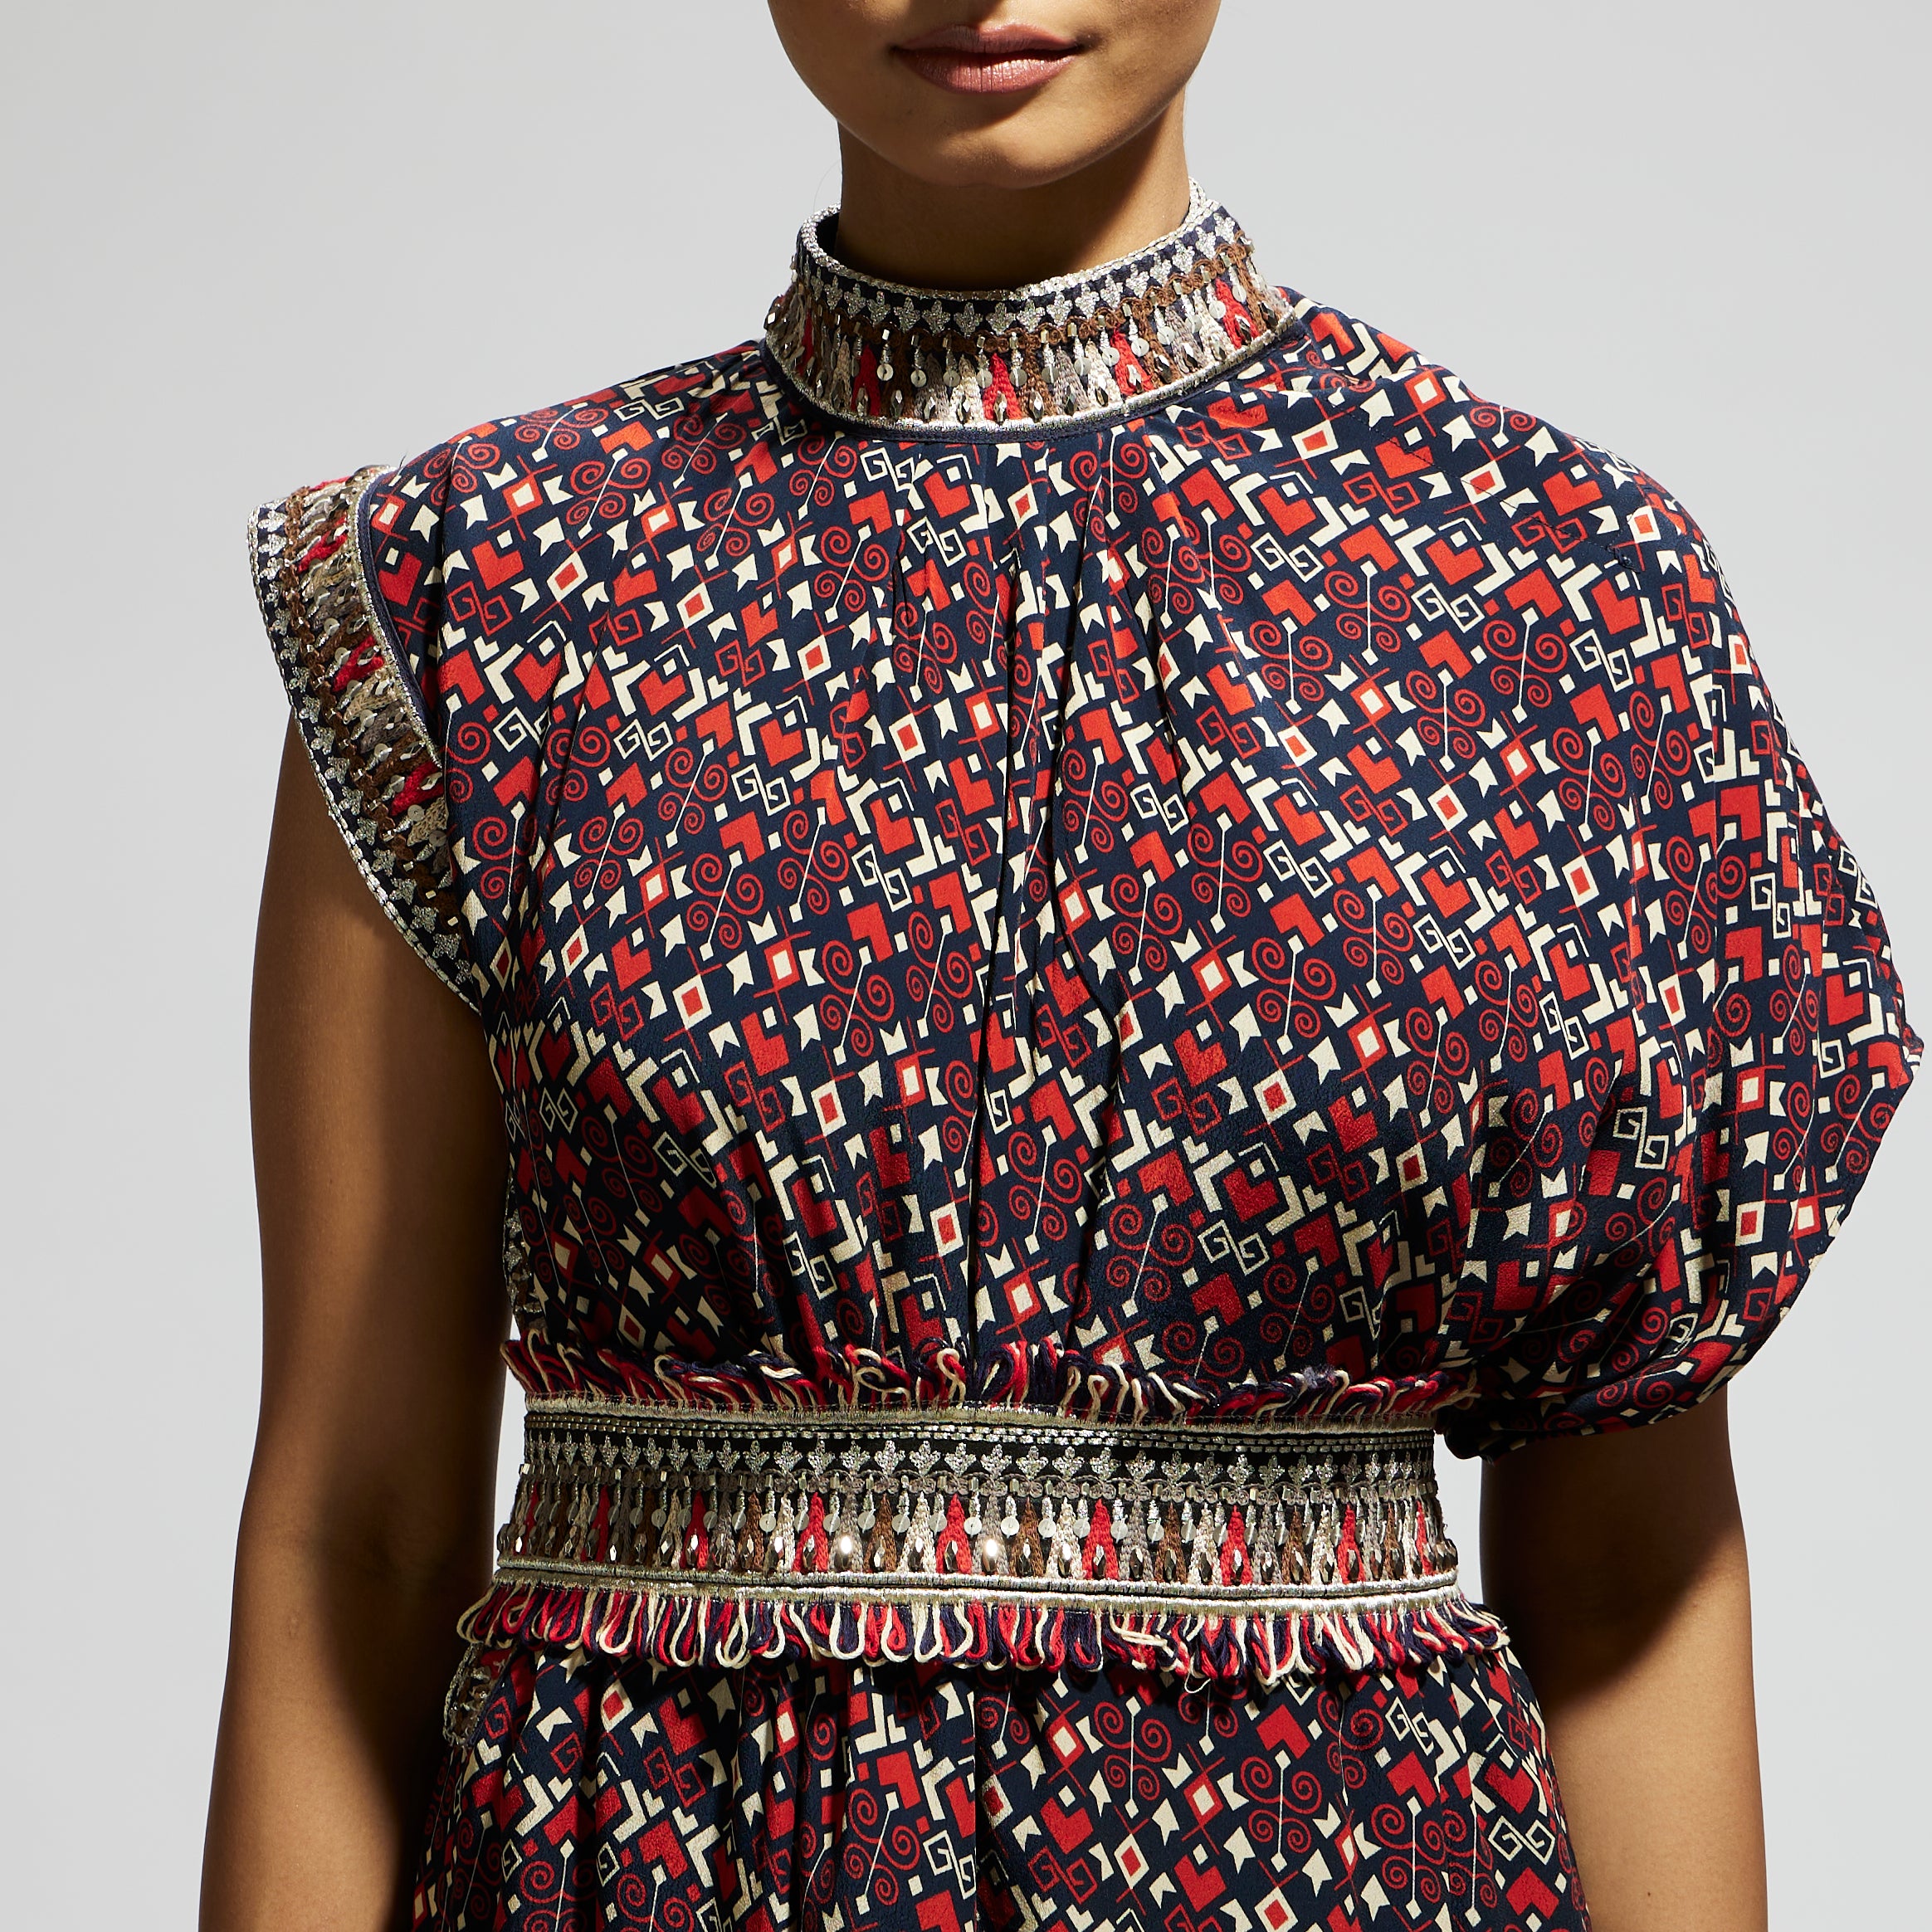 BLUE GEO PRINTED COWL DRESS TEAMED WITH A BELT